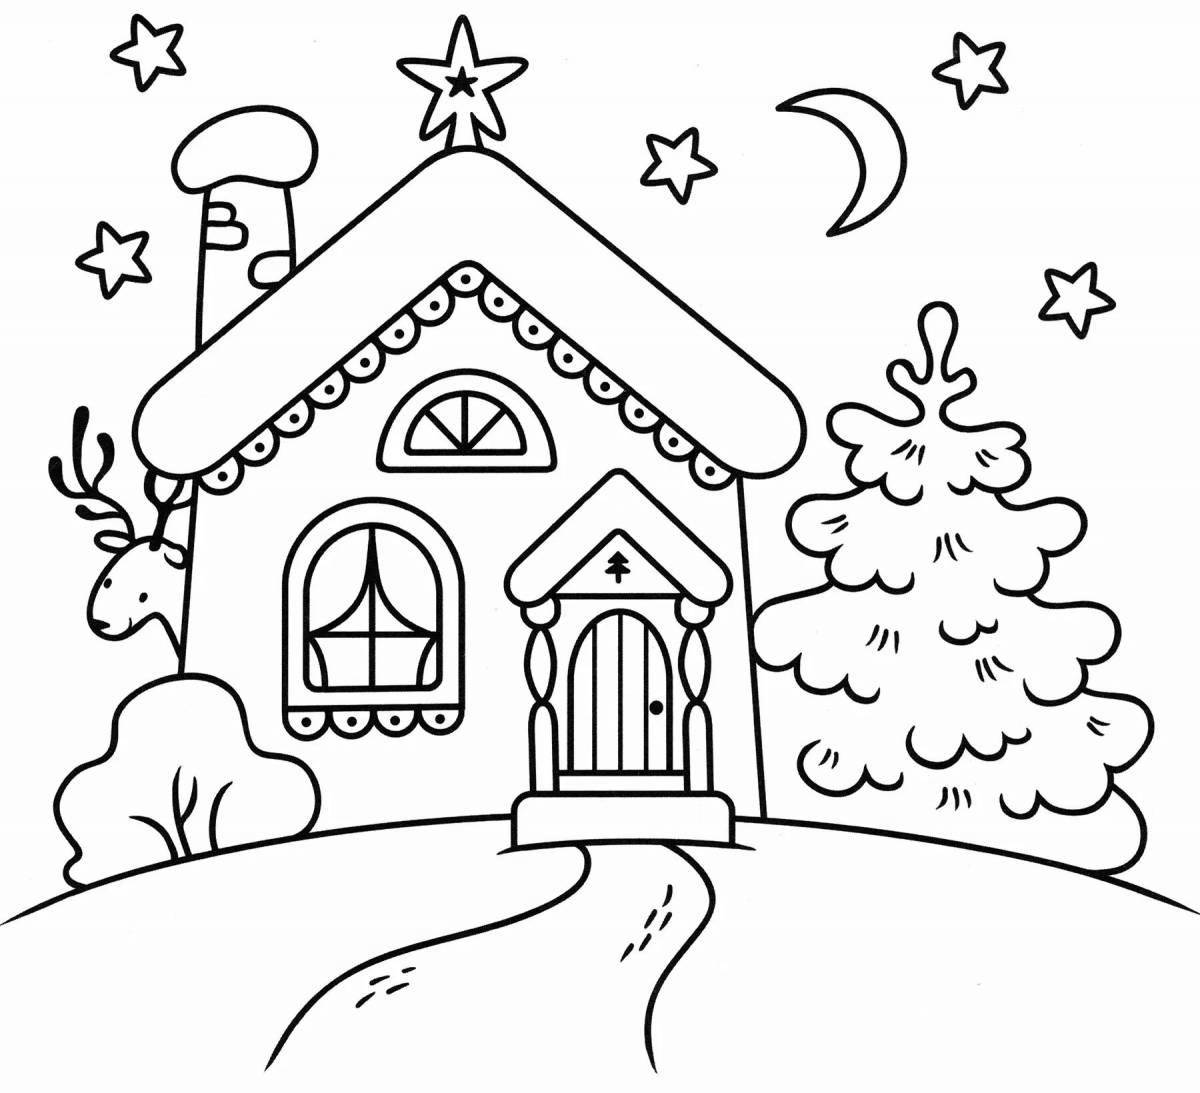 Coloring book glowing Christmas house